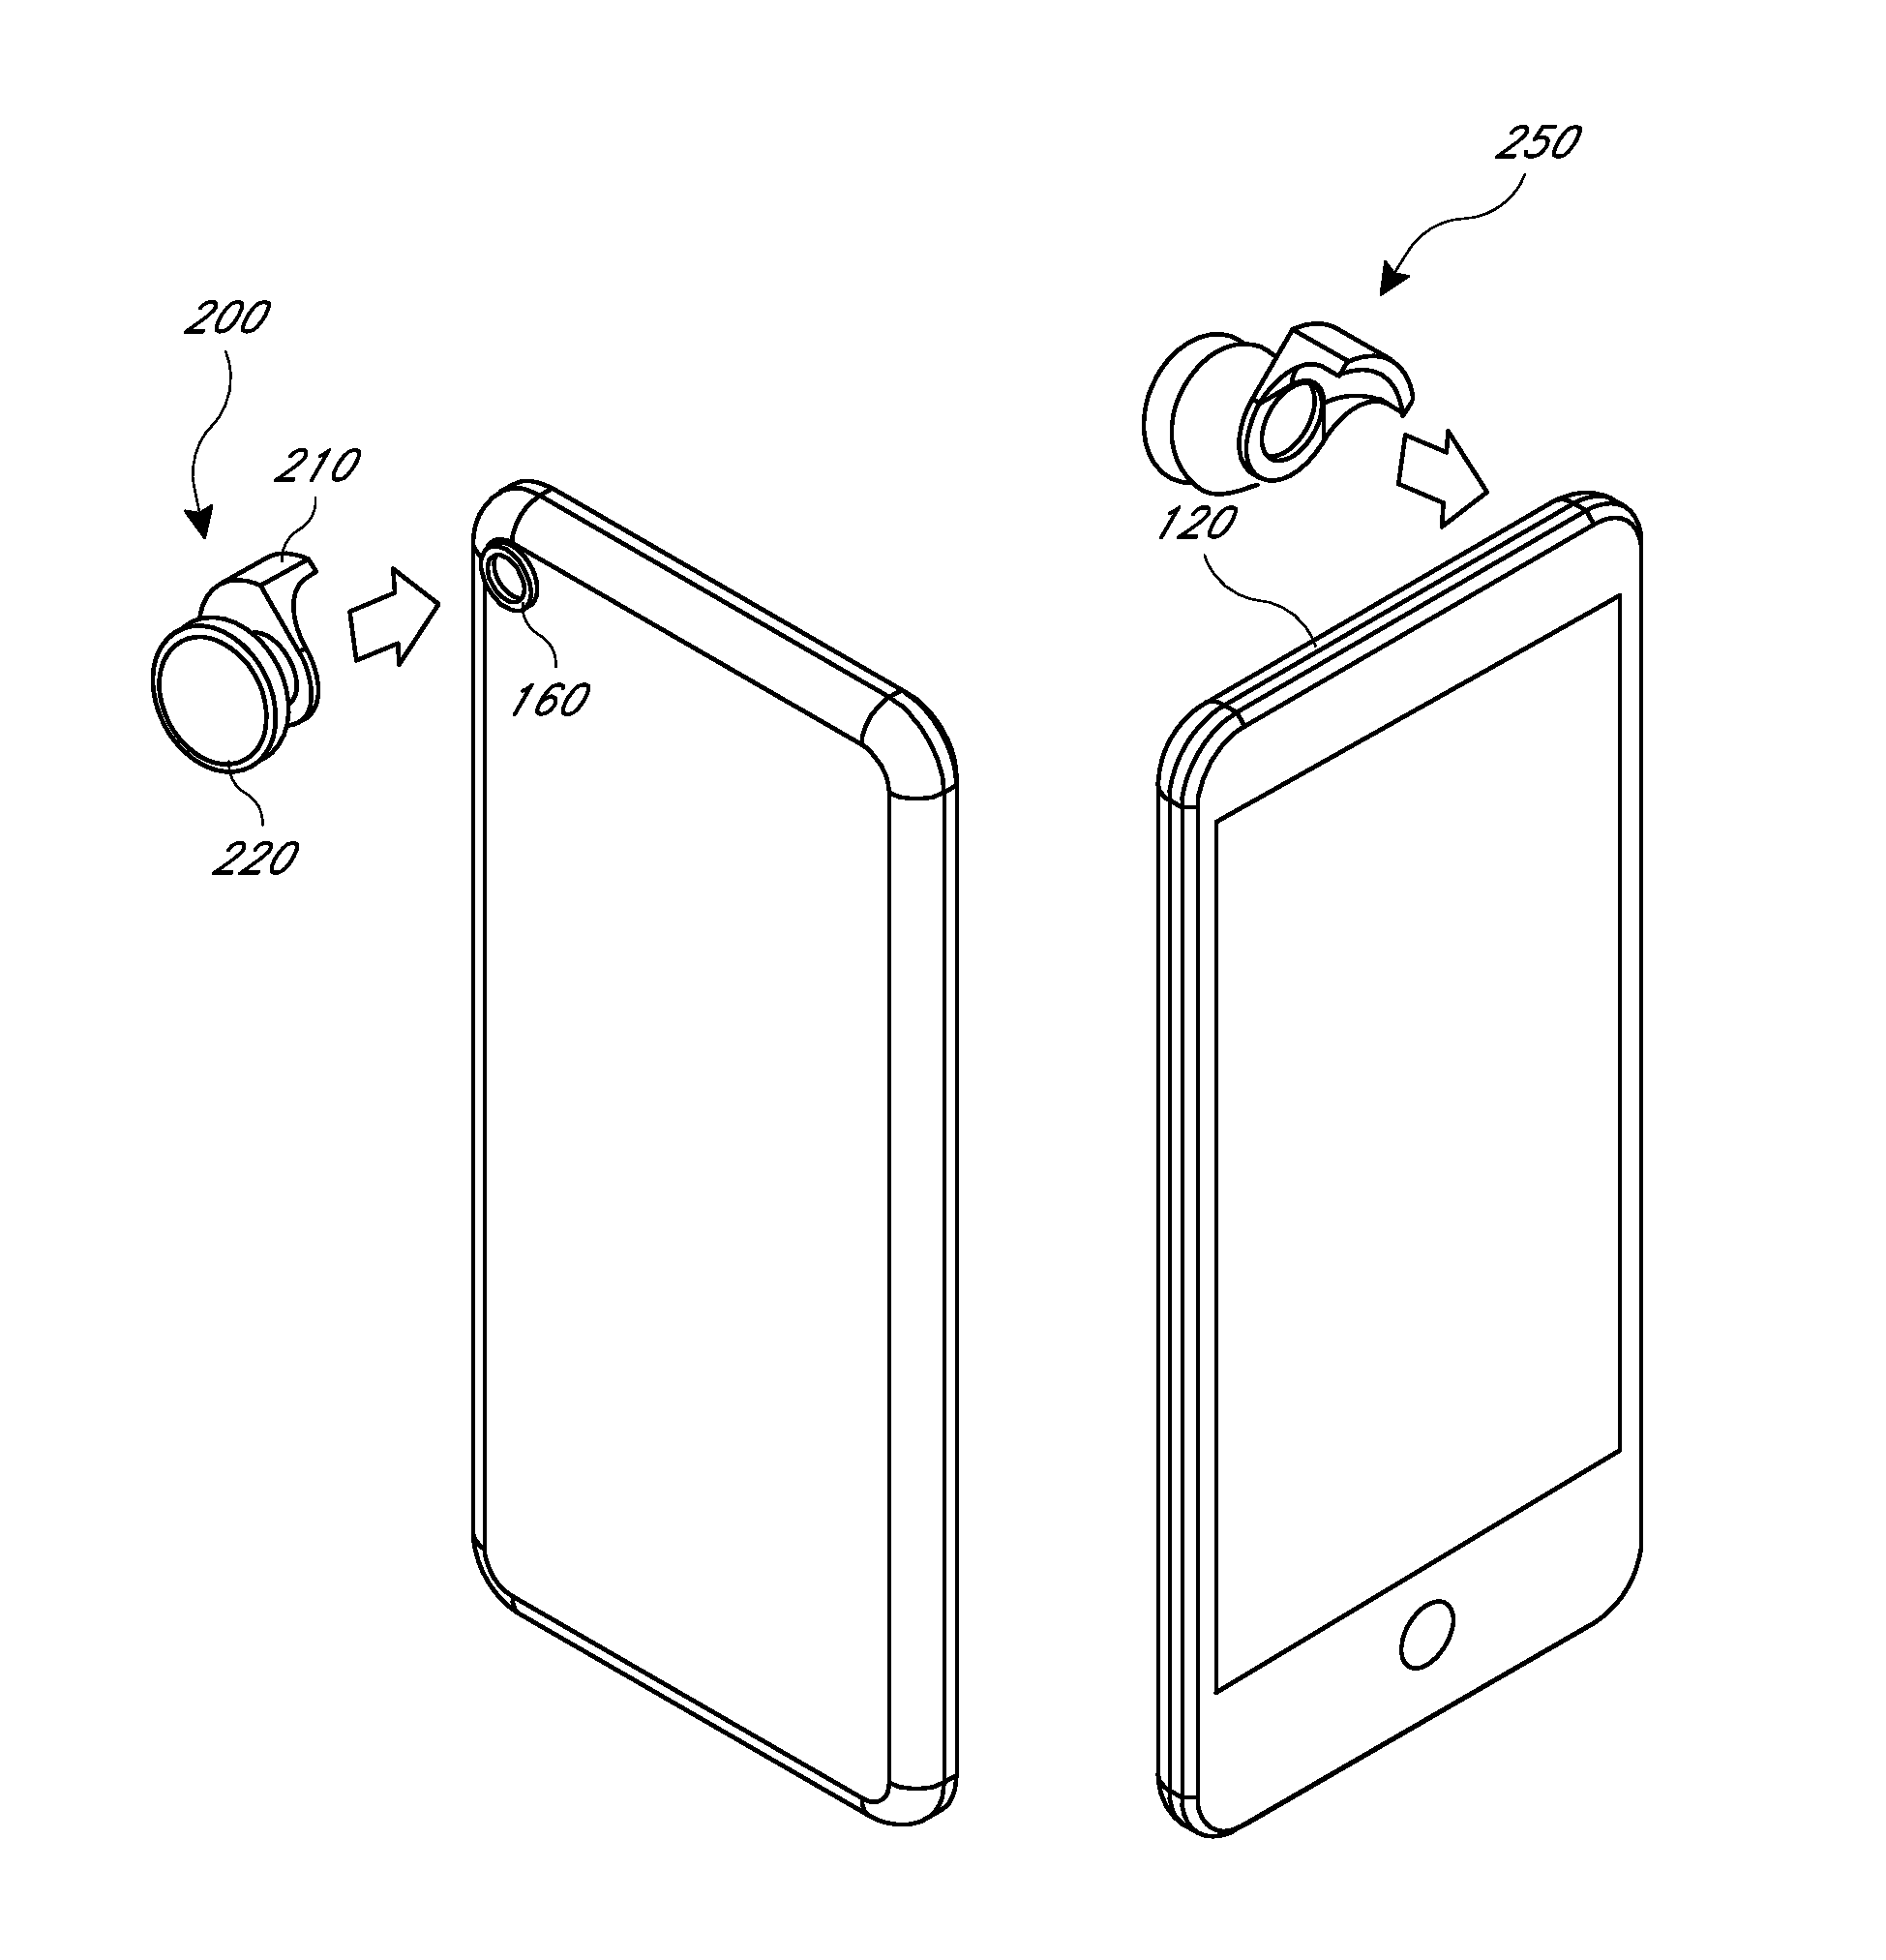 Removable optical devices for mobile electronic devices